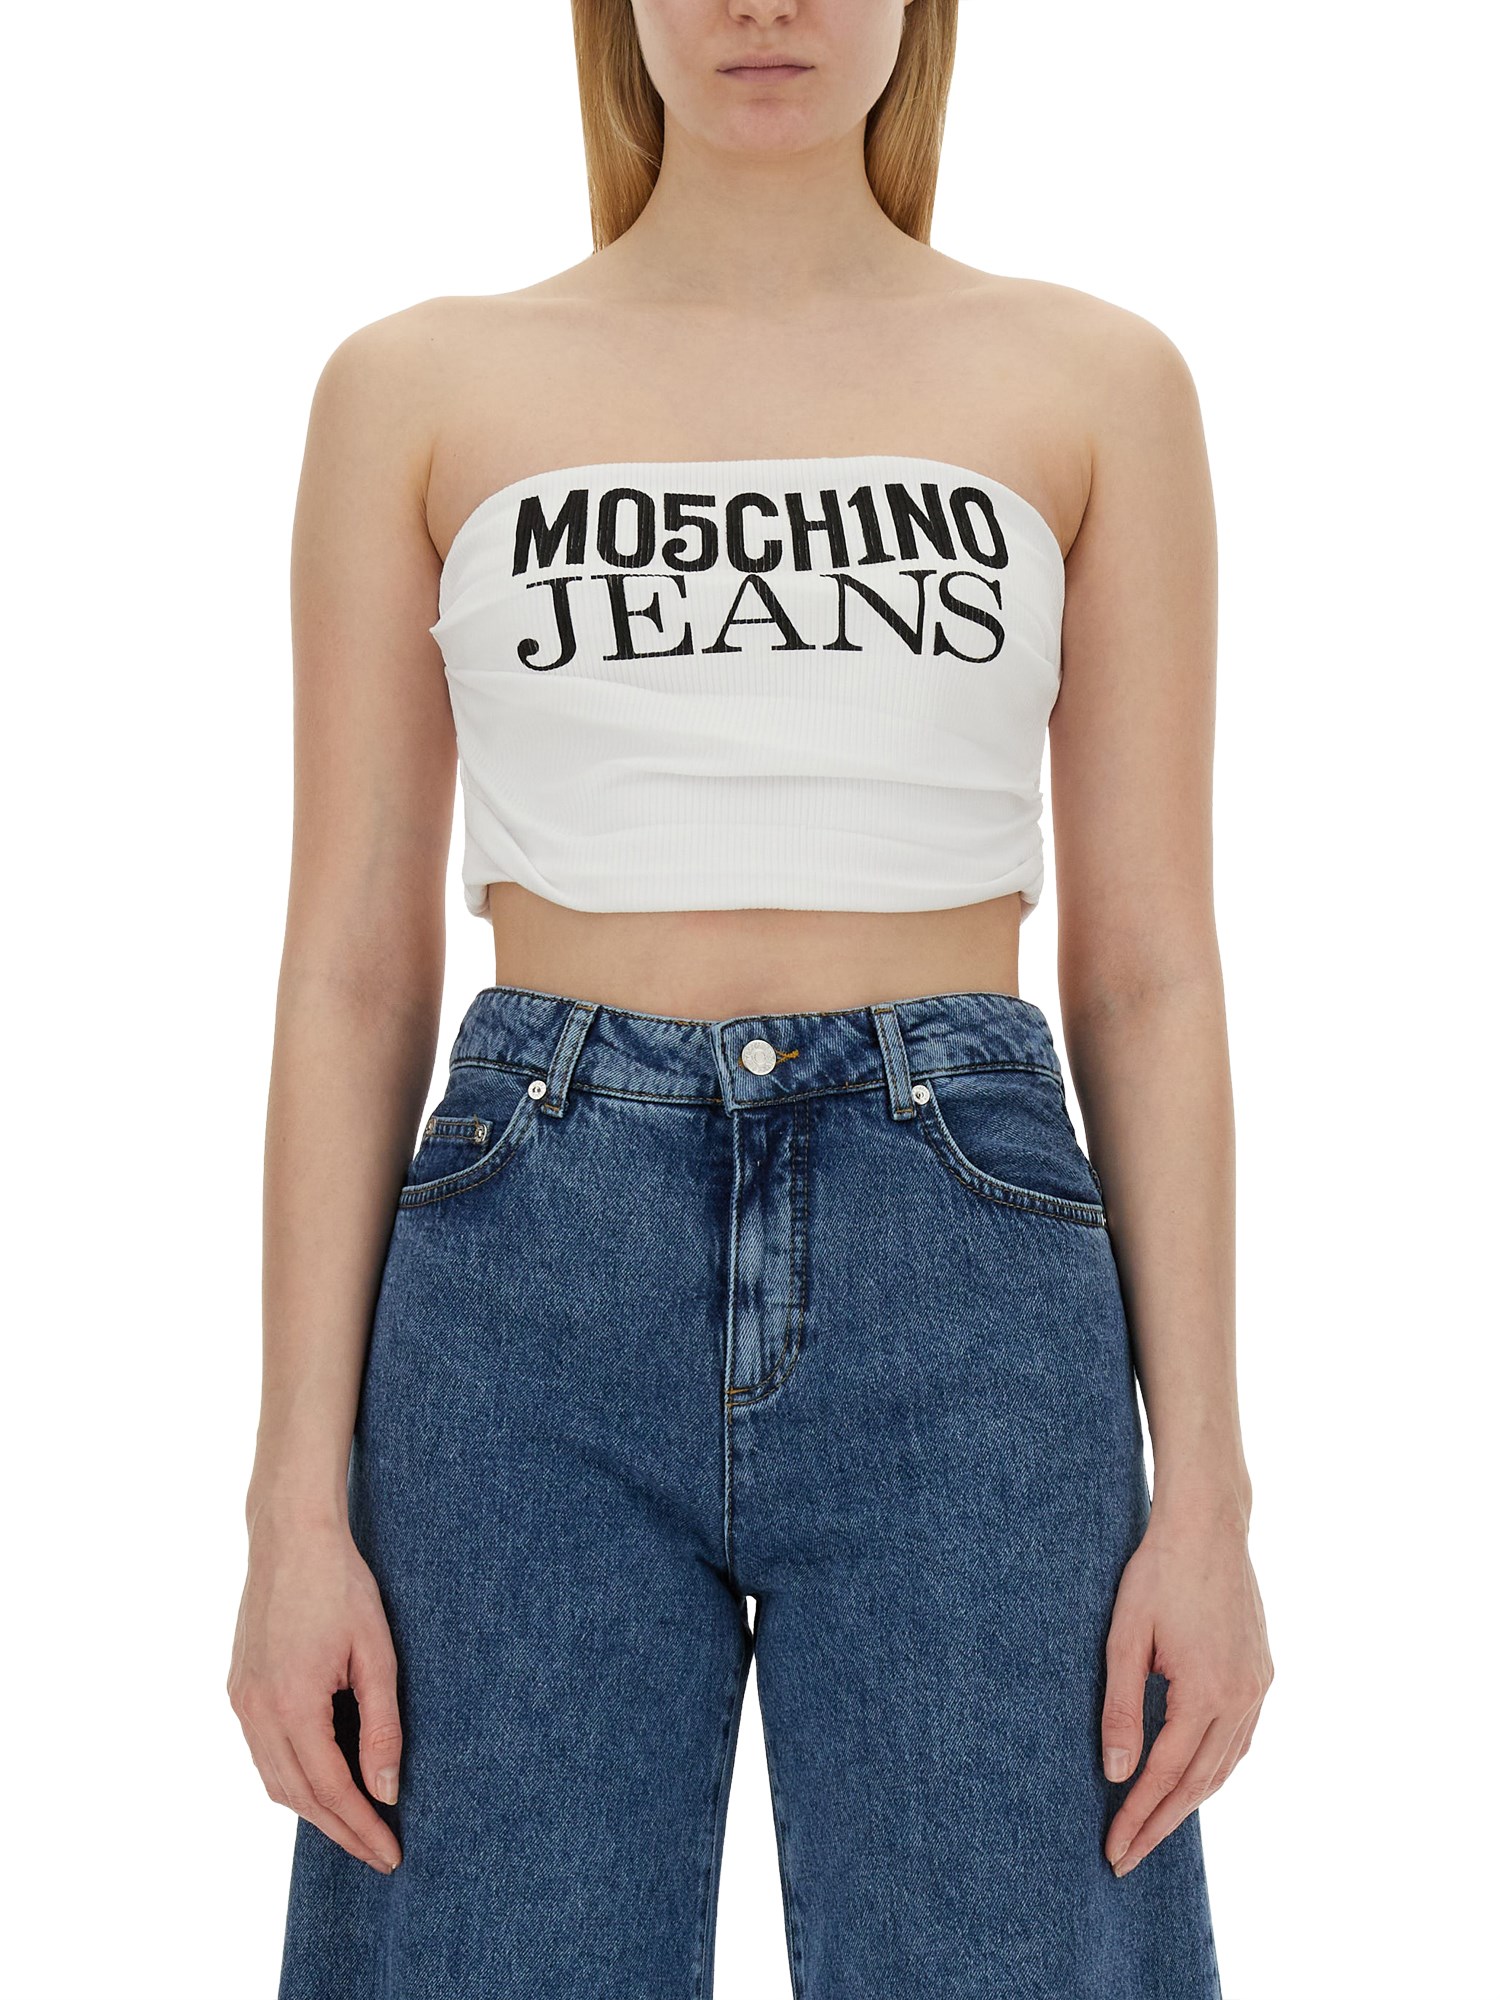 Moschino Jeans moschino jeans tops with logo